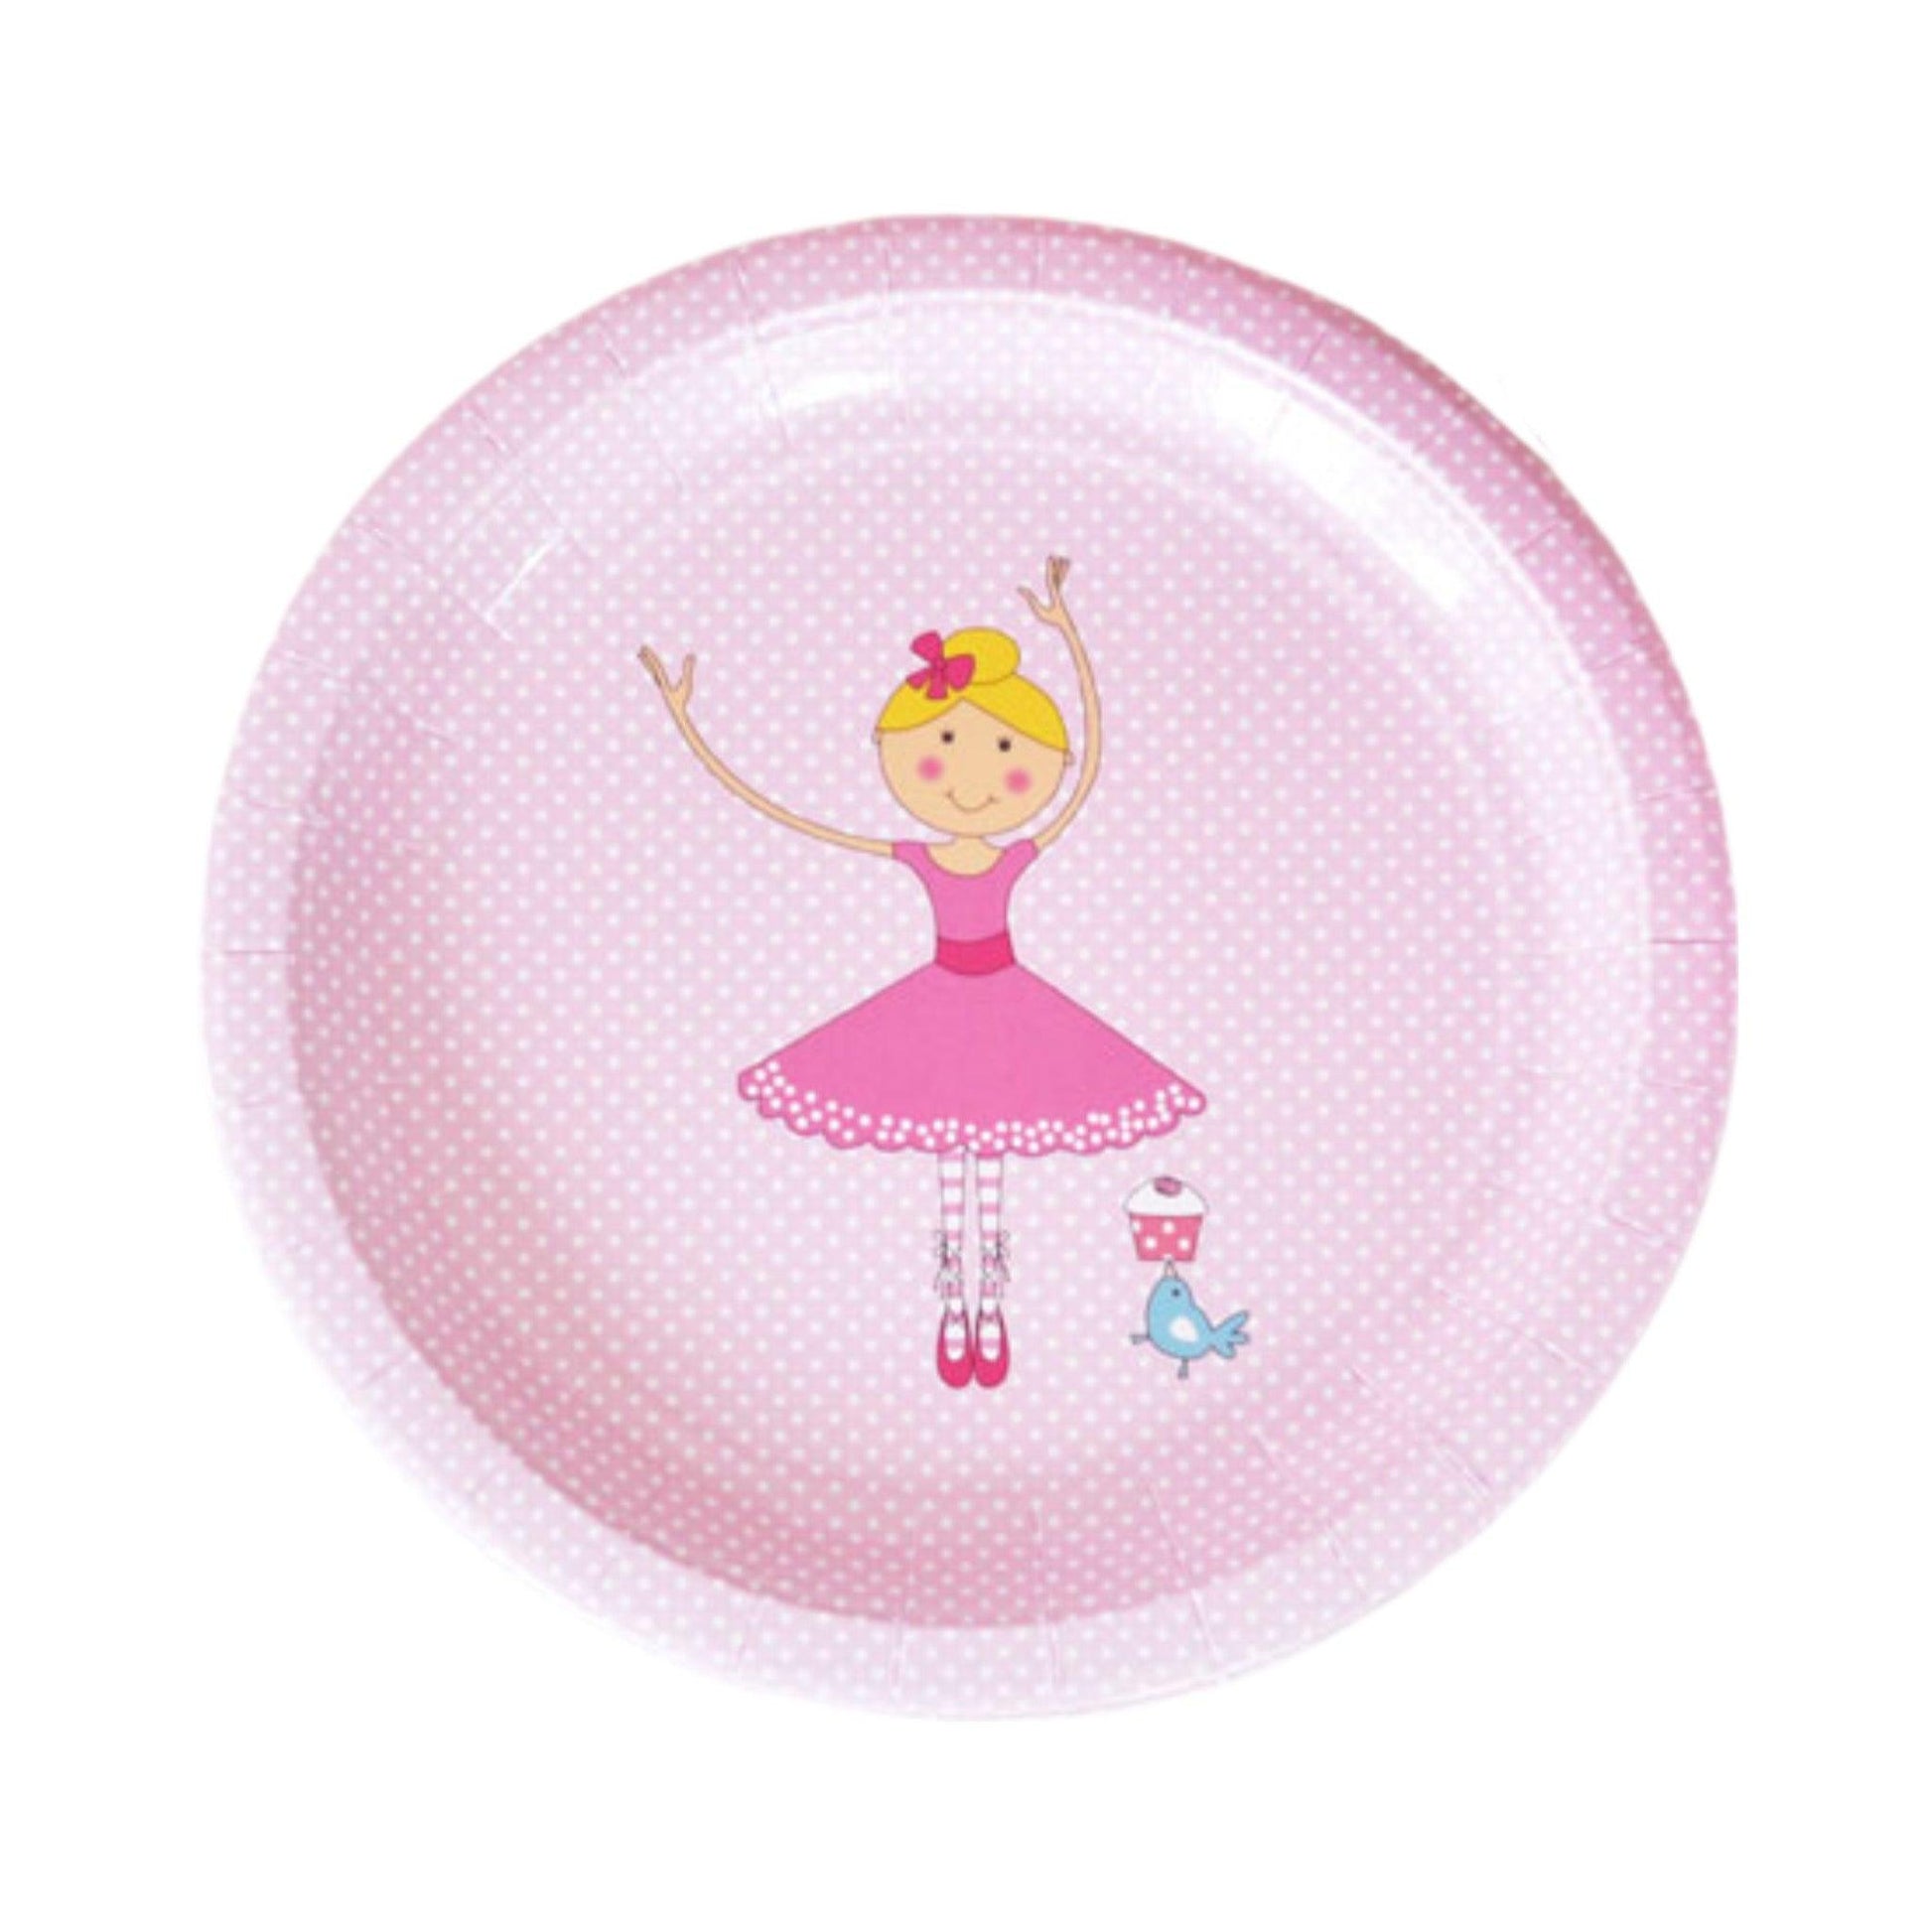 Pink Ballerina paper plate with polka dots and dancing ballerina